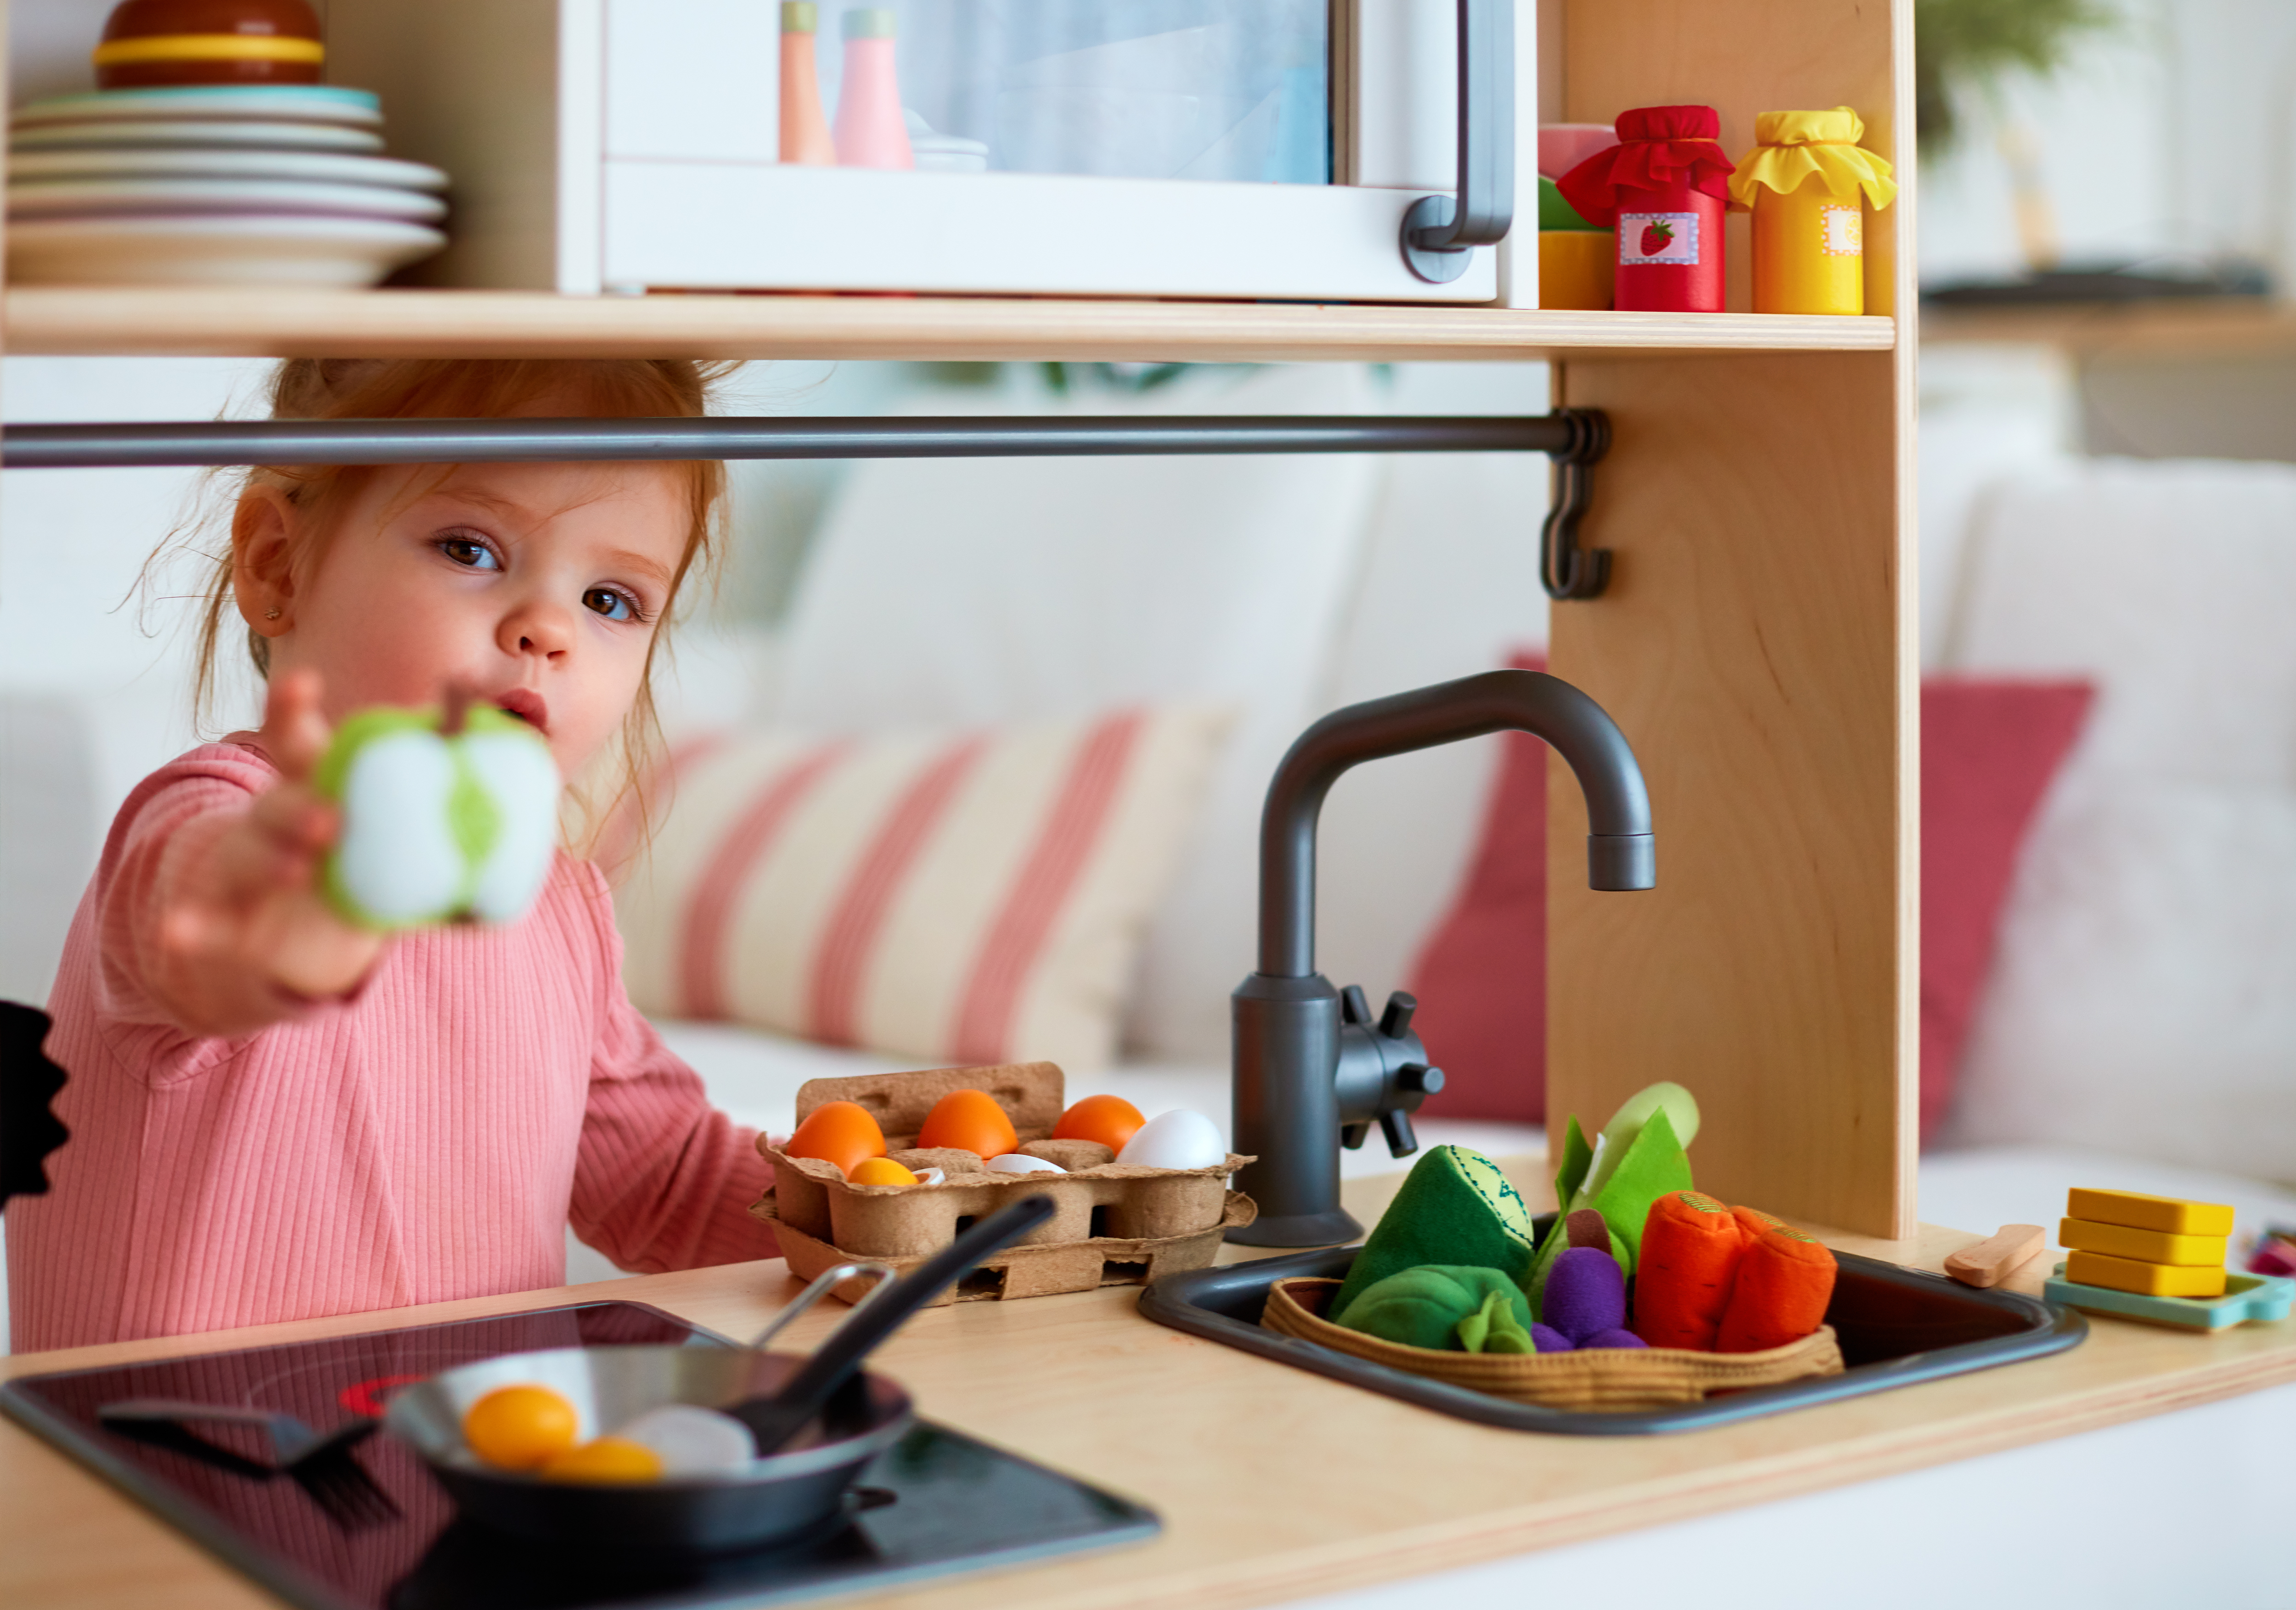 A child holding out a plastic apple in a toy kitchen | Source: Shutterstock